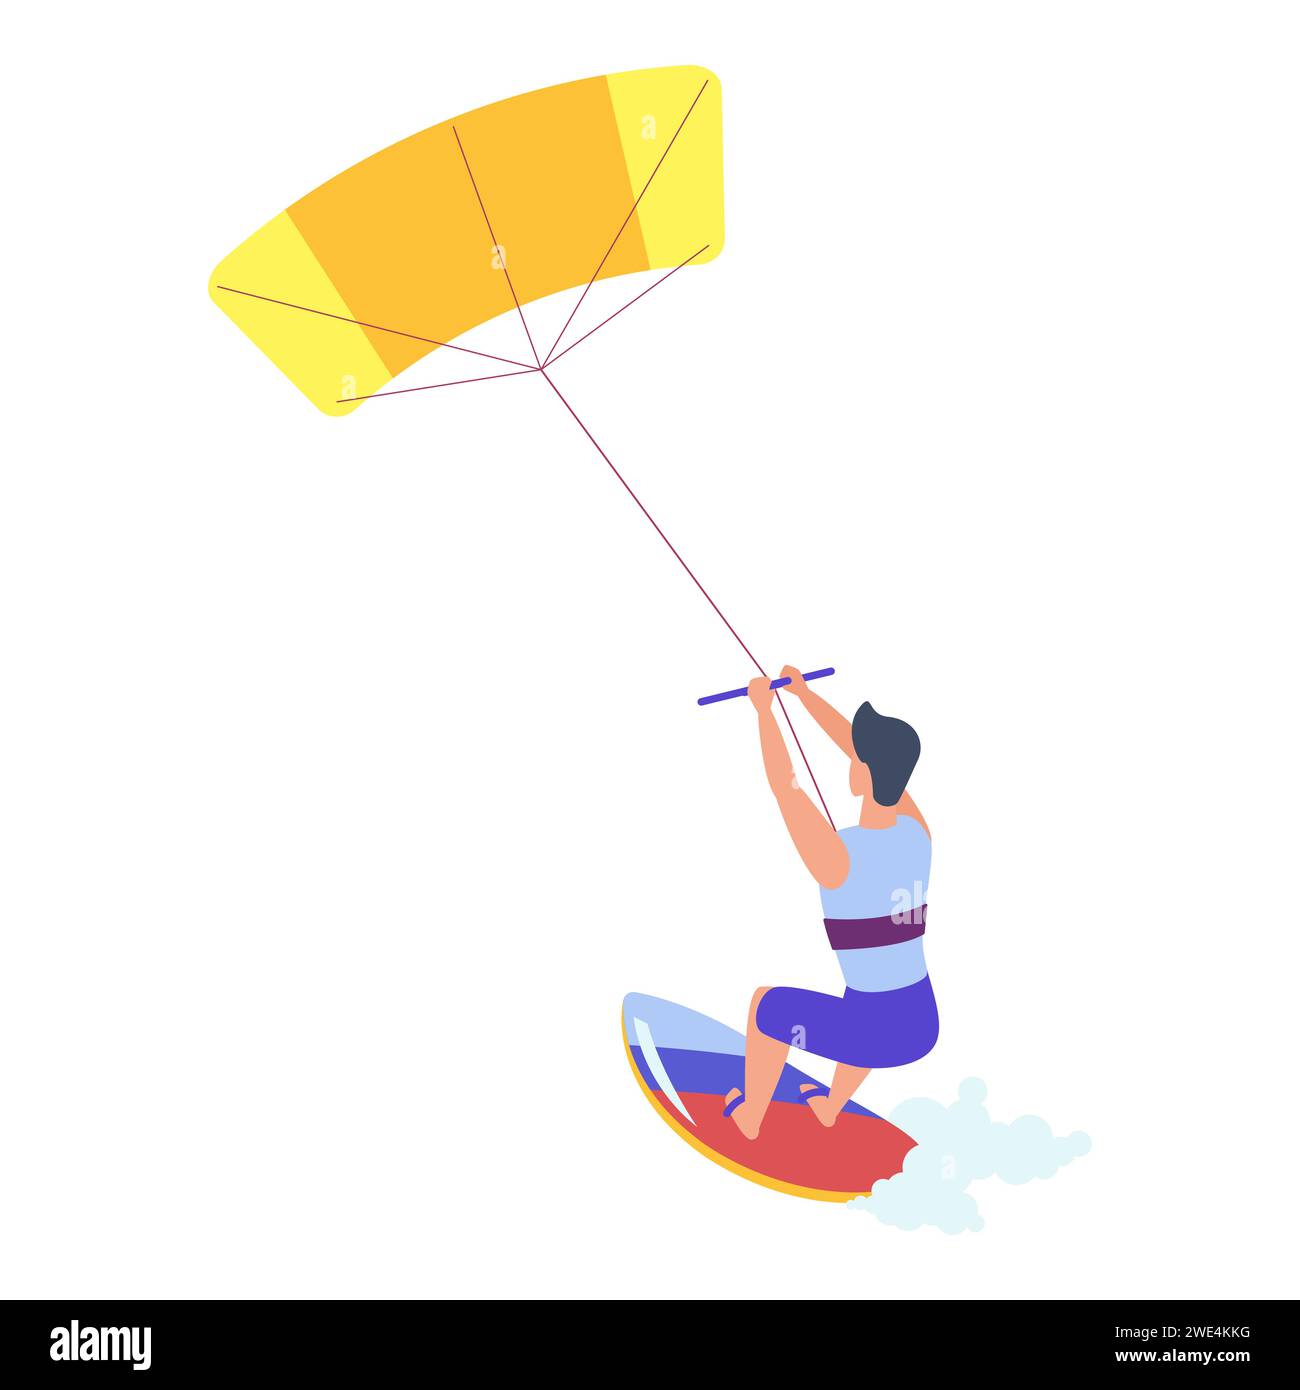 Man kitesurfing, extreme active summer water sport and hobby vector illustration Stock Vector